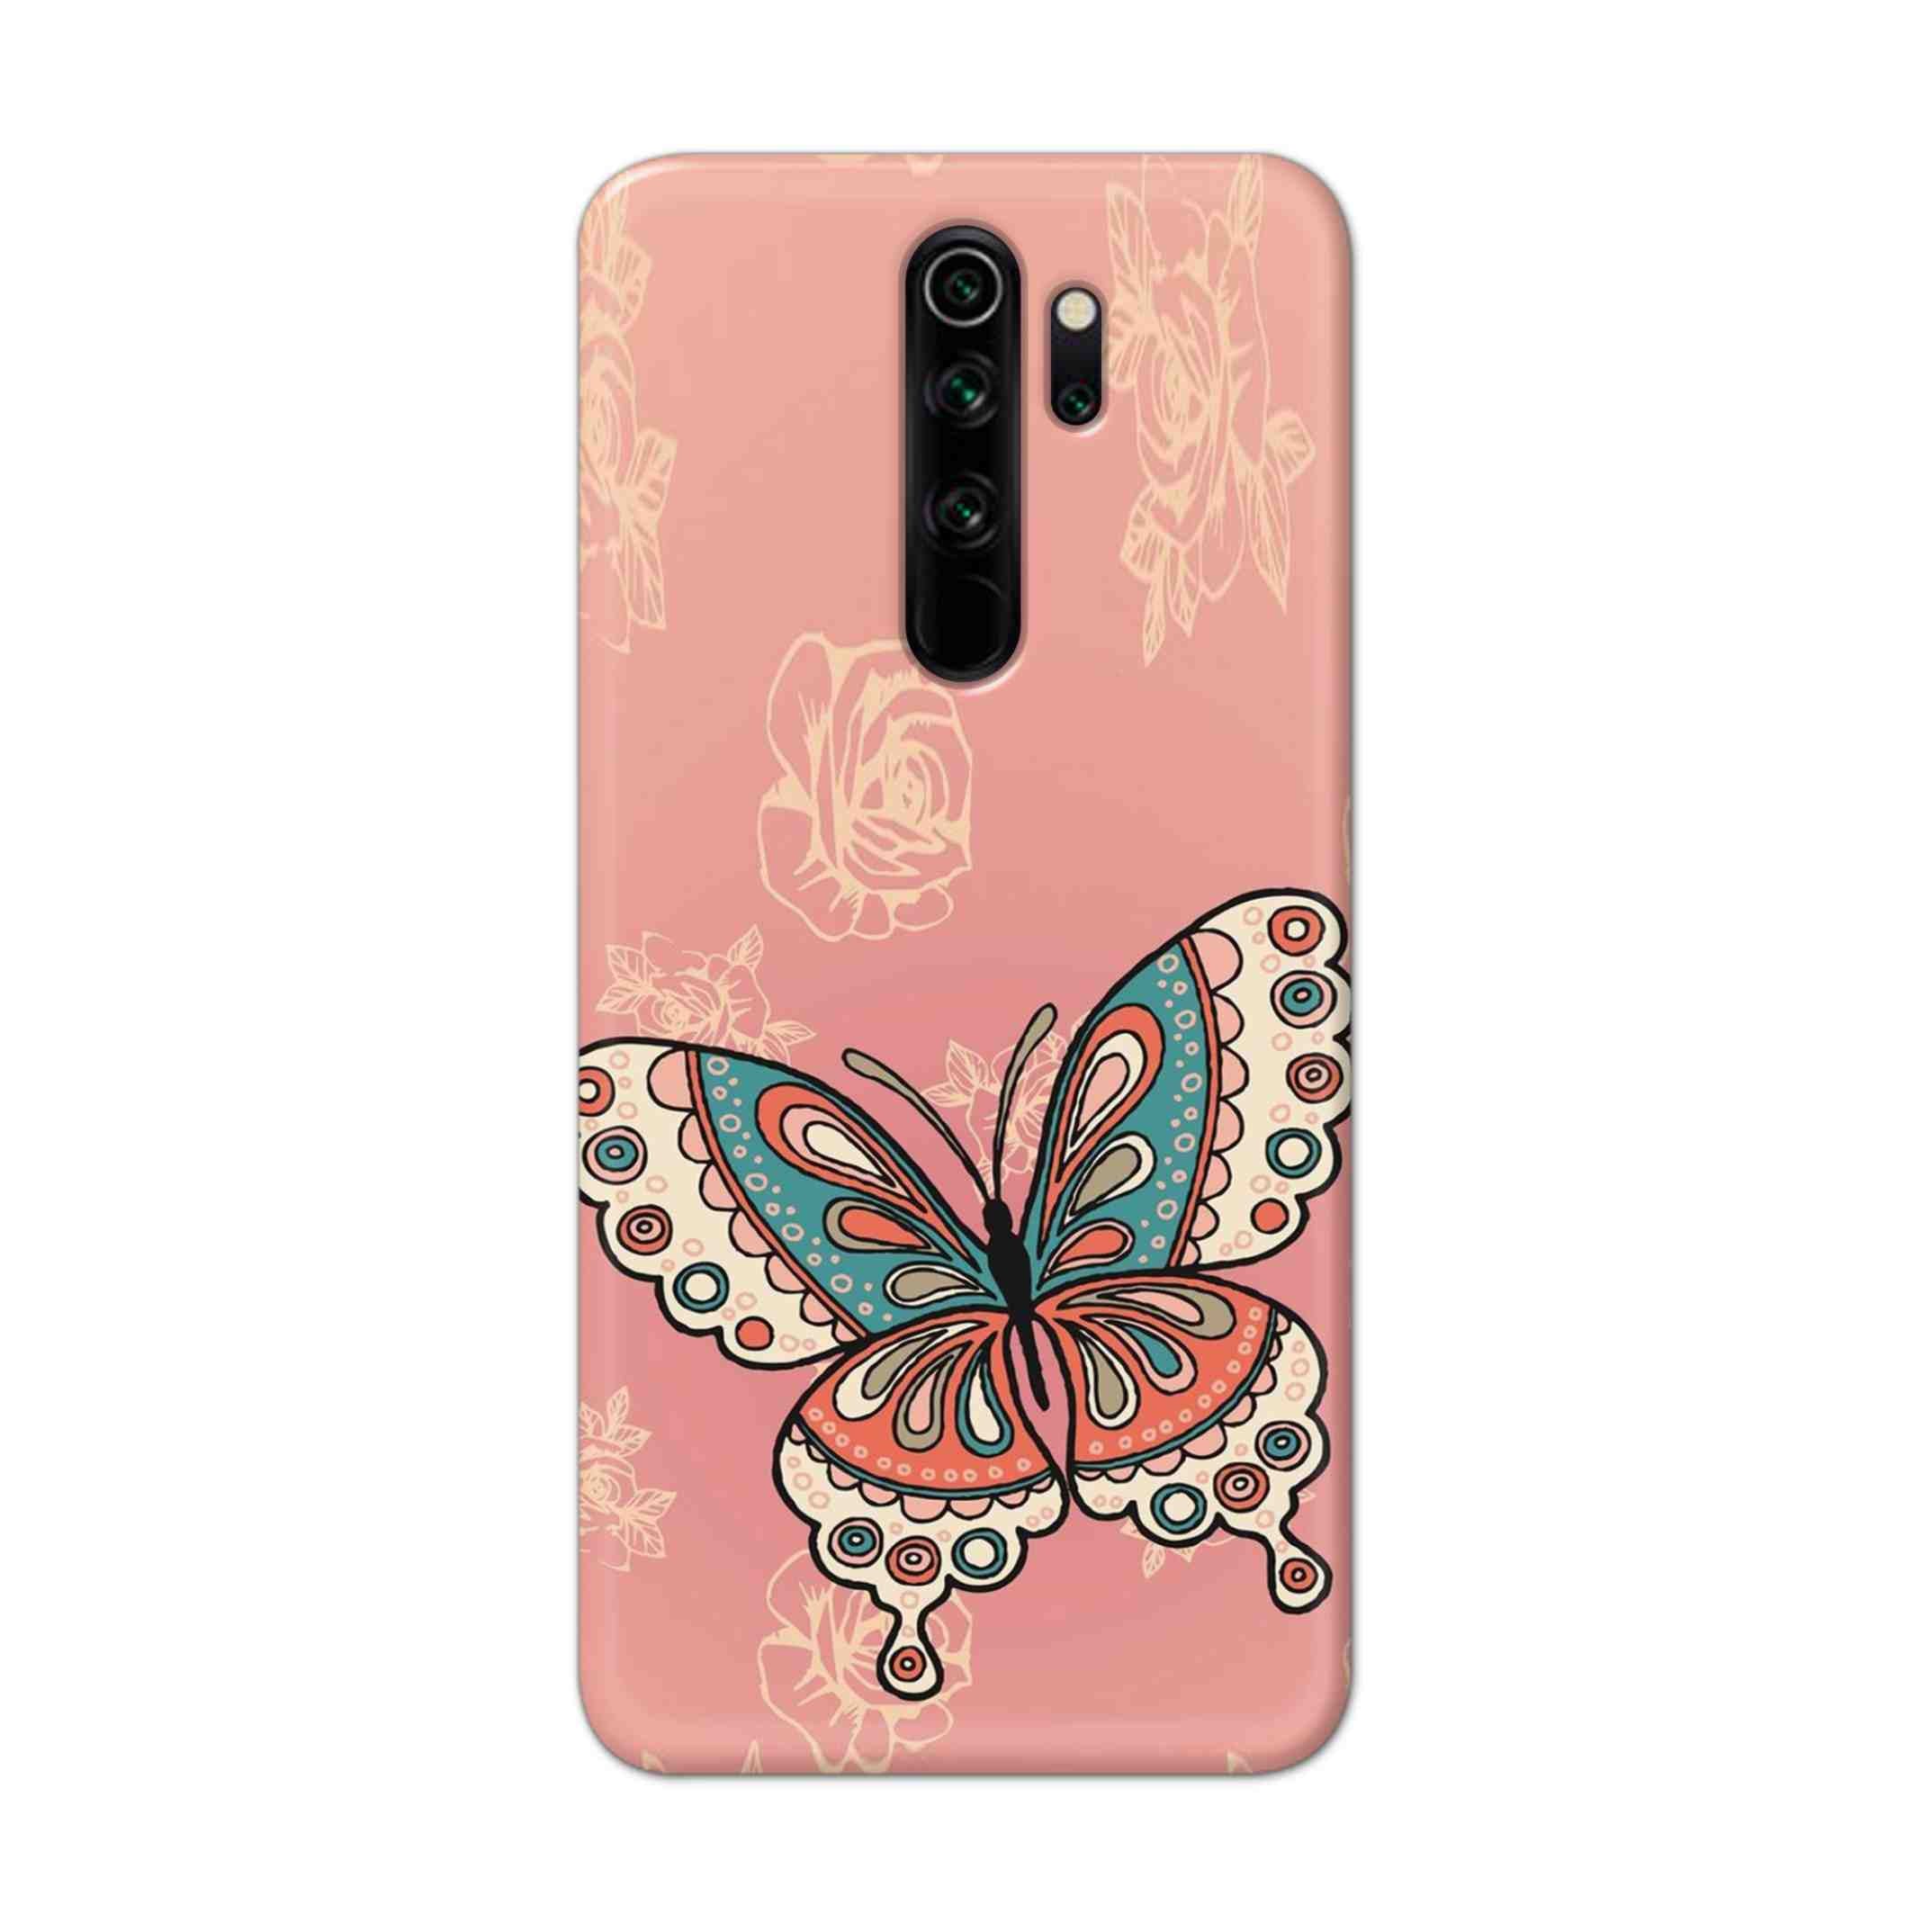 Buy Butterfly Hard Back Mobile Phone Case Cover For Xiaomi Redmi Note 8 Pro Online